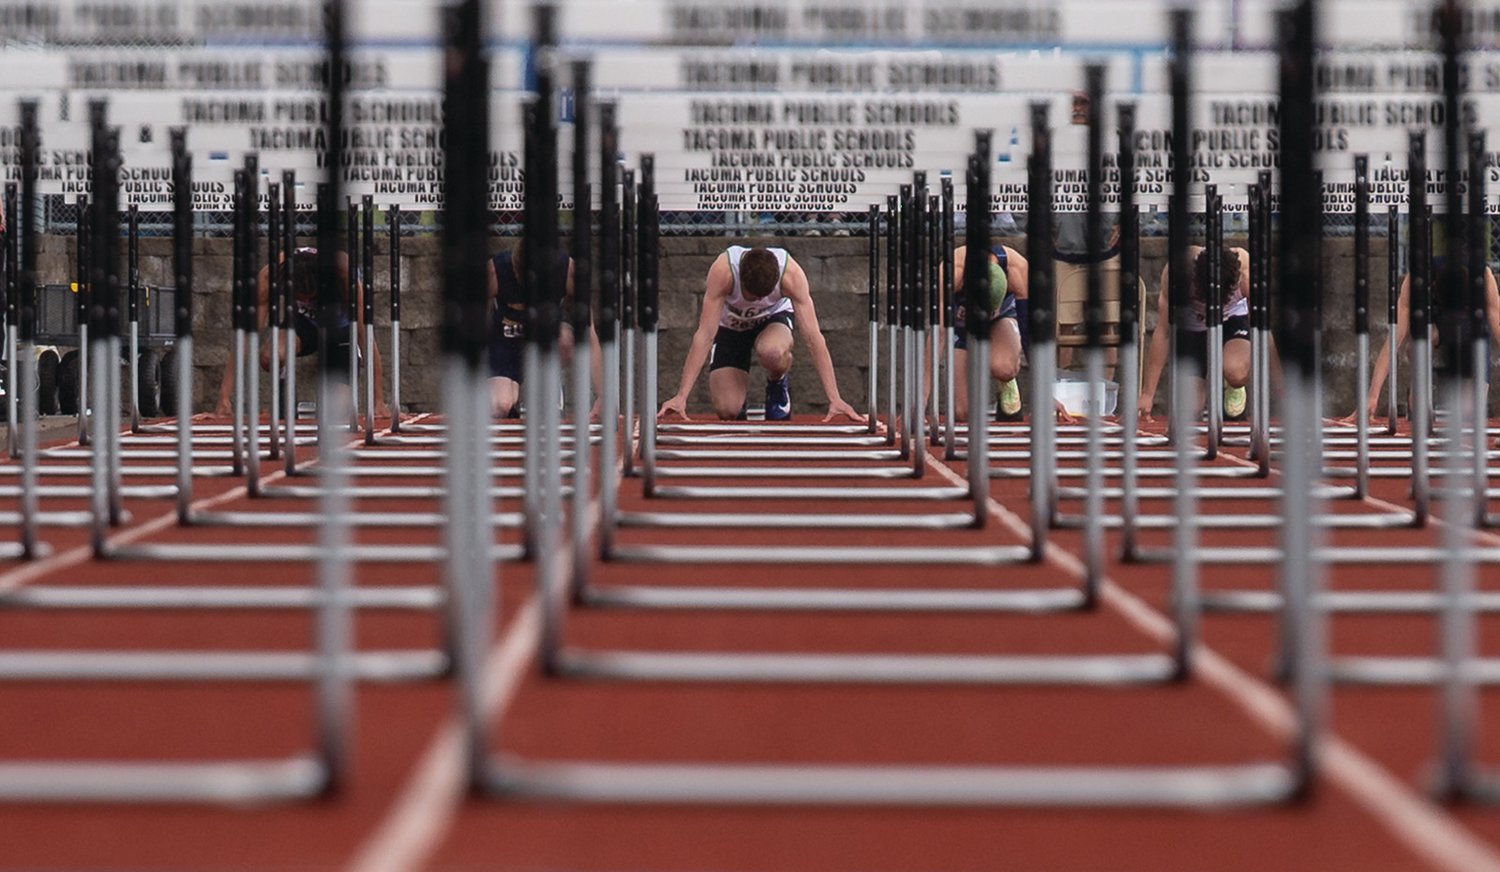 Tumwater's Seth Weller gets set on his mark in the 110 Hurdles at the 4A/3A/2A State Track and Field Championships on Friday, May 27, 2022, at Mount Tahoma High School in Tacoma. (Joshua Hart/For ScorebookLive)